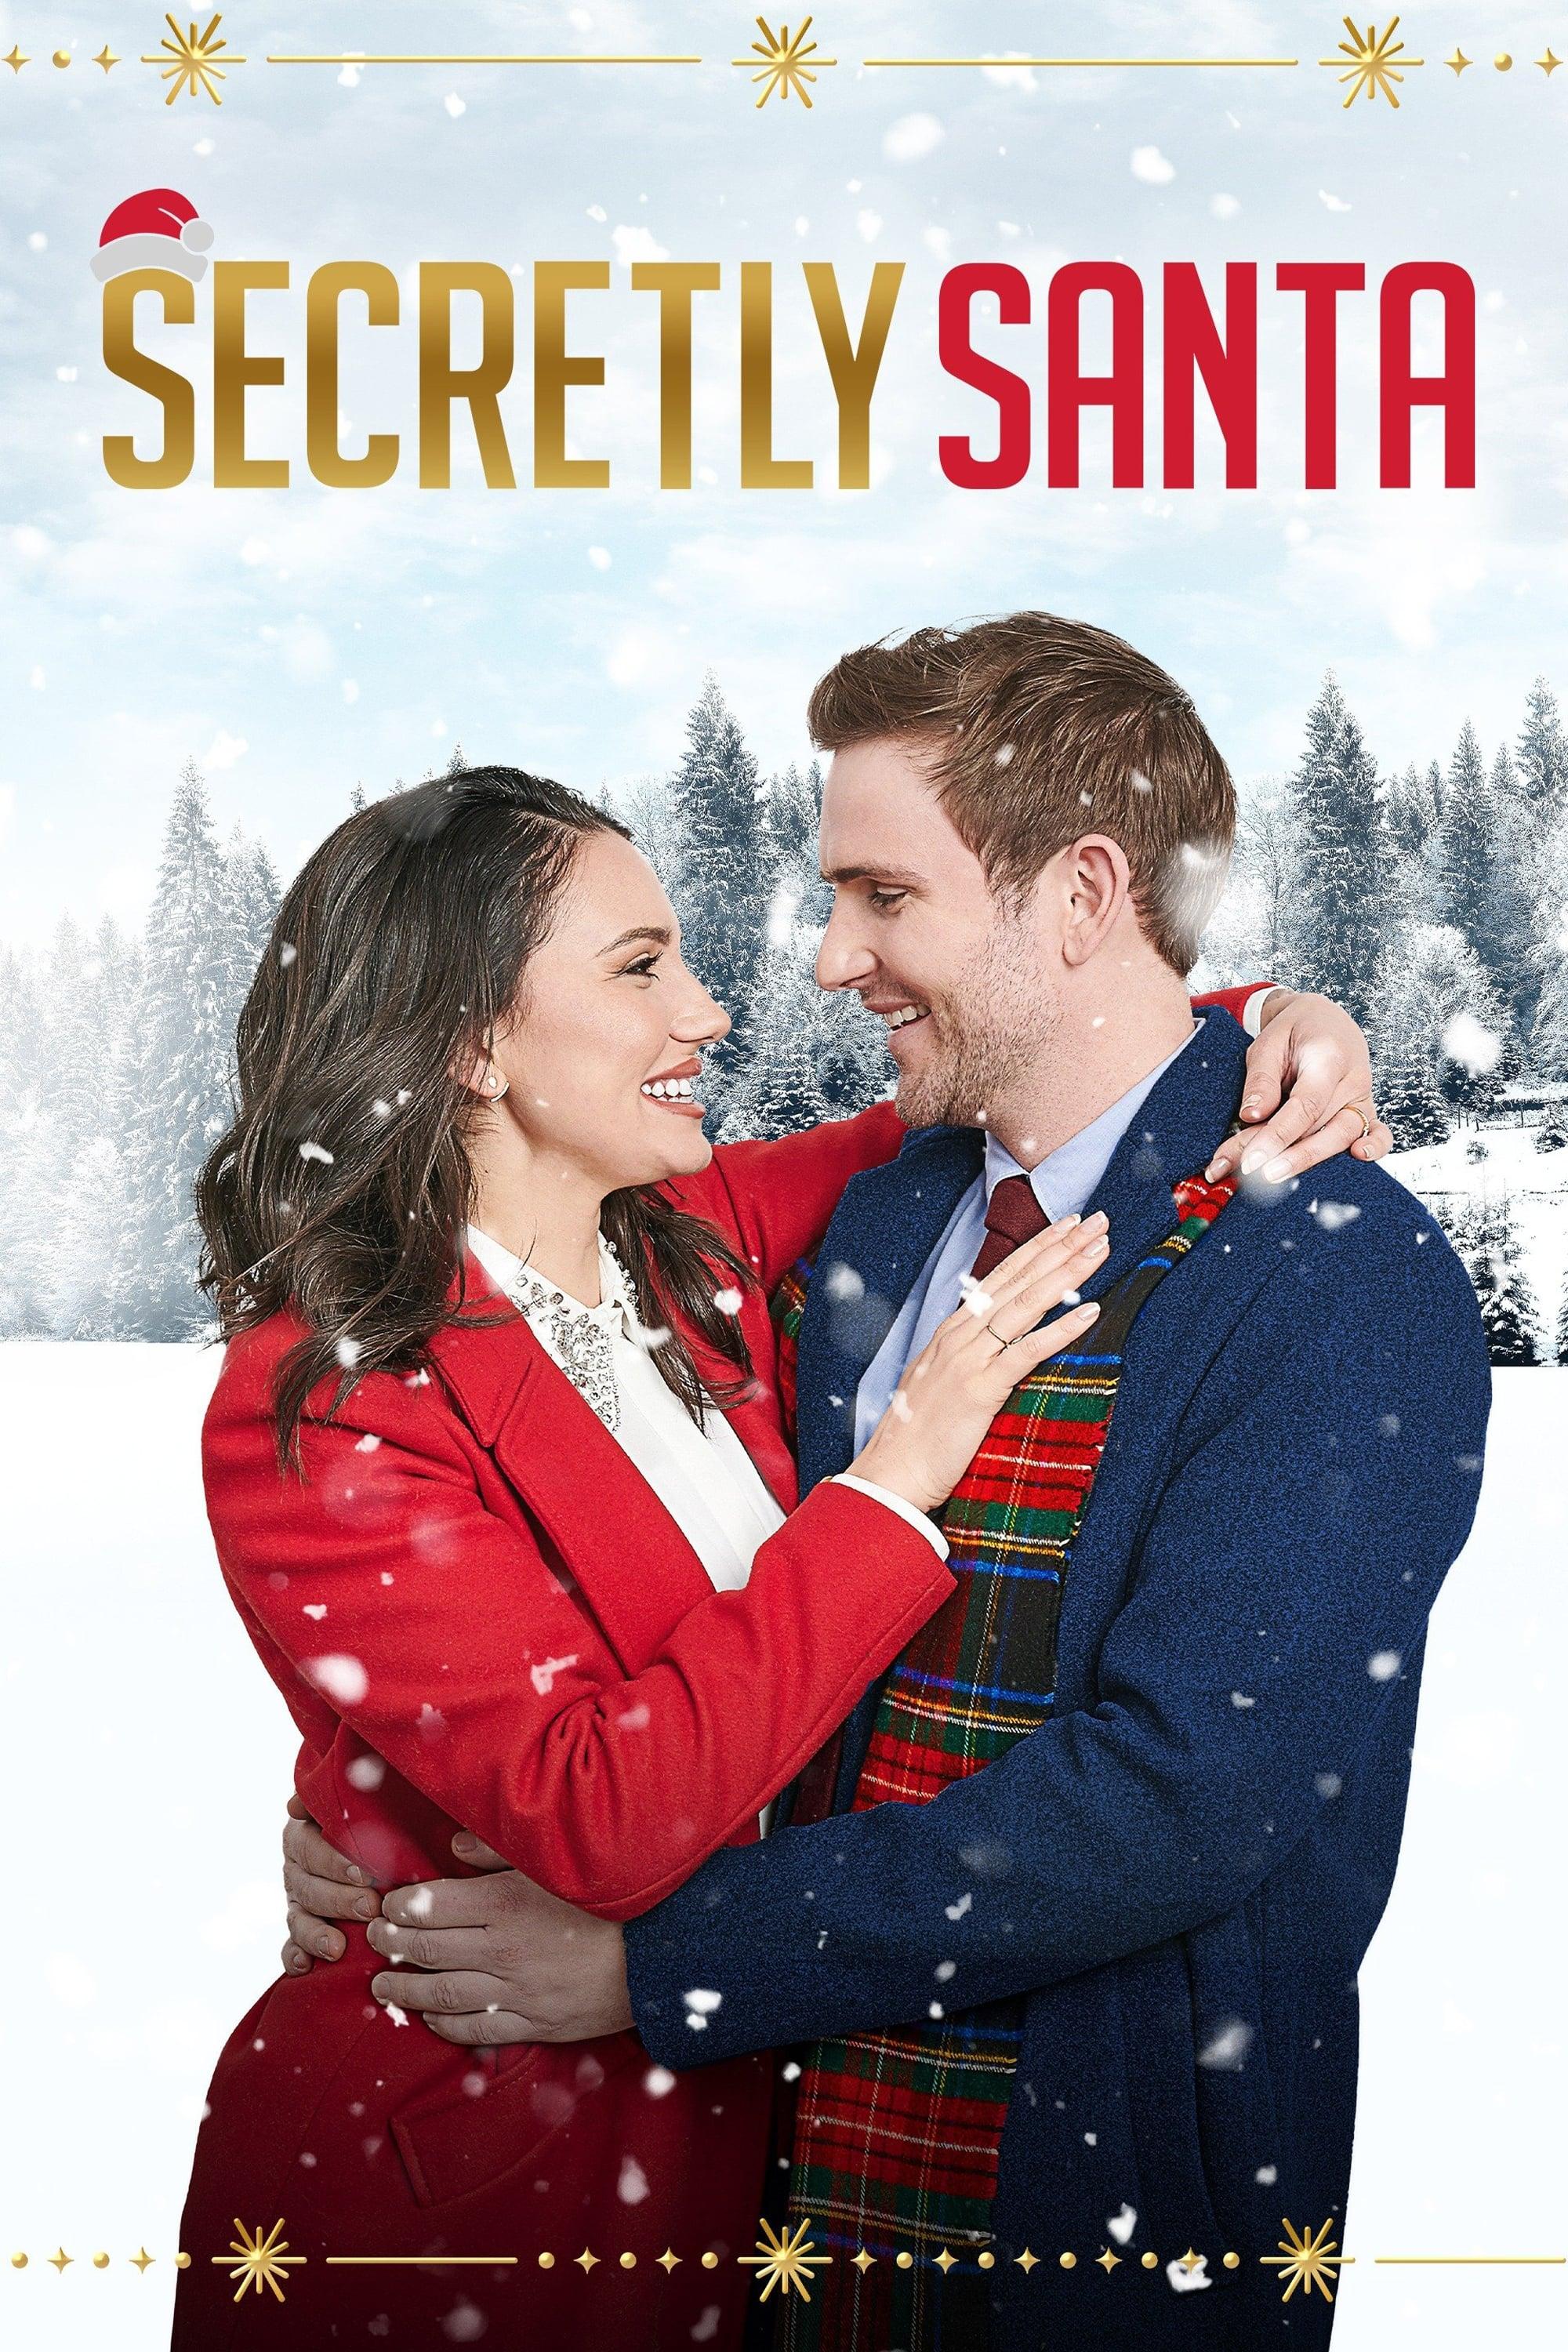 Falling in Love at Christmas poster